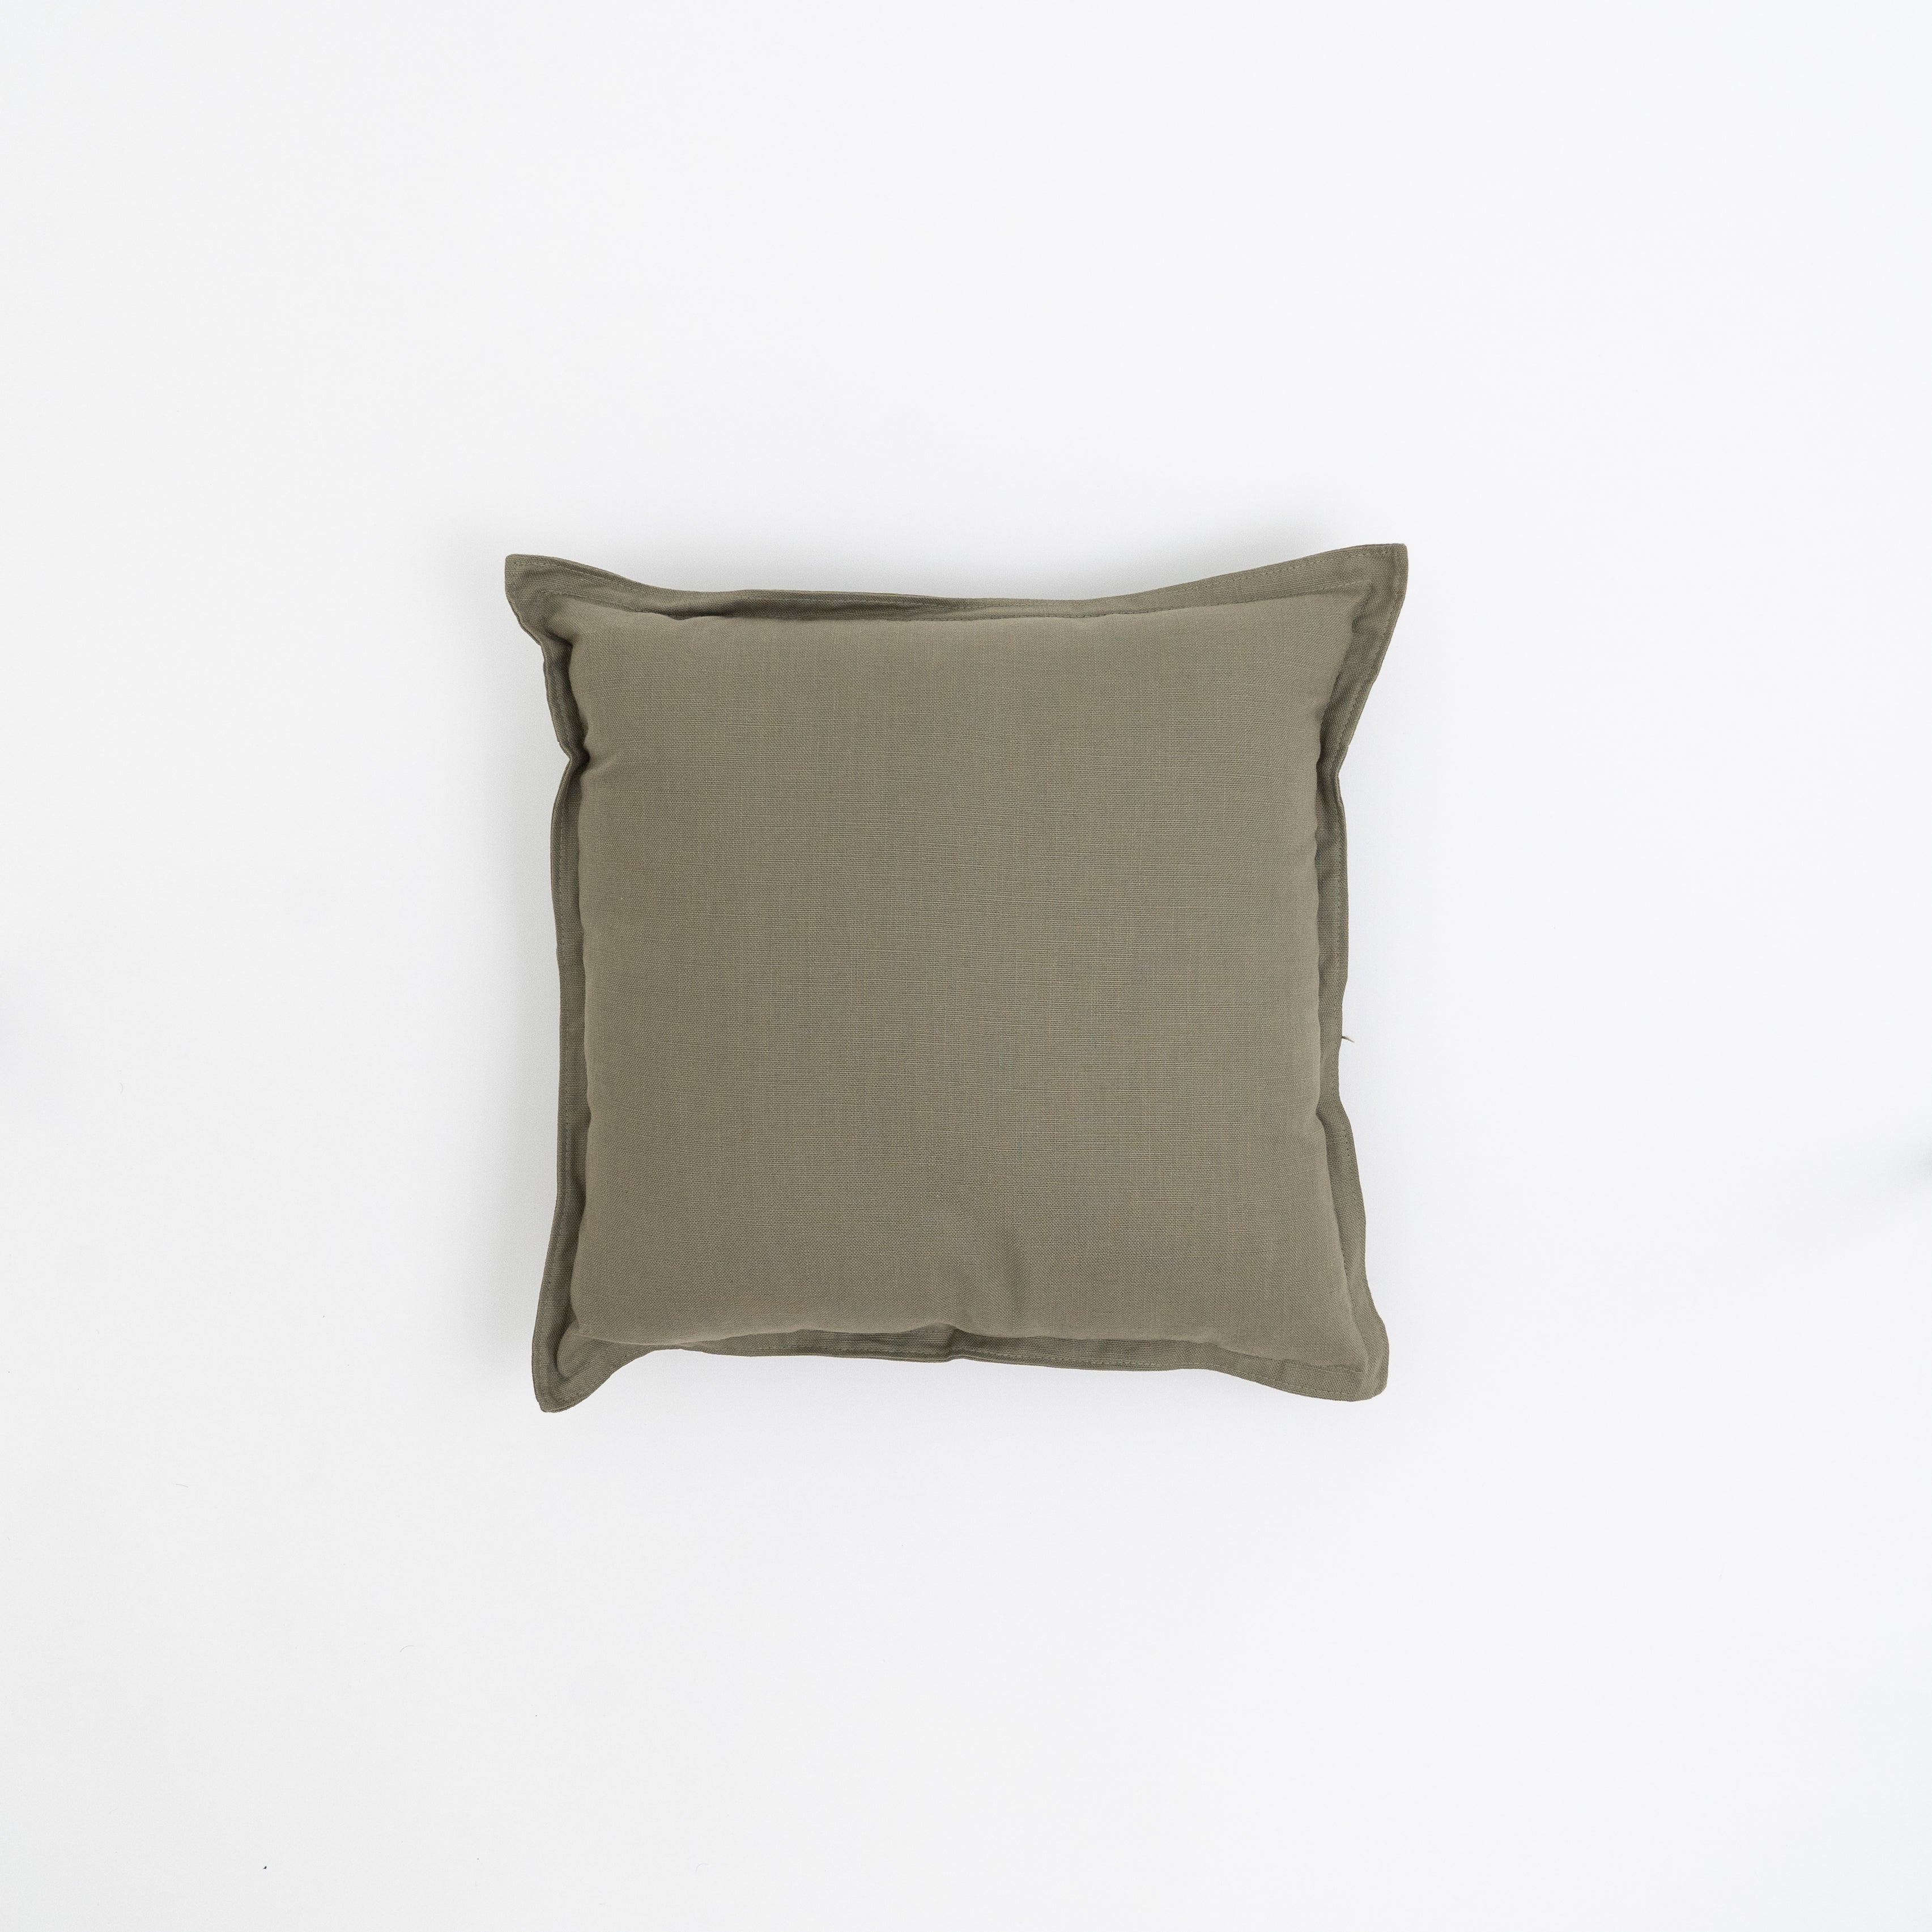 Cushion Cover Brown 45 x45cm - Wood and Steel Furnitures